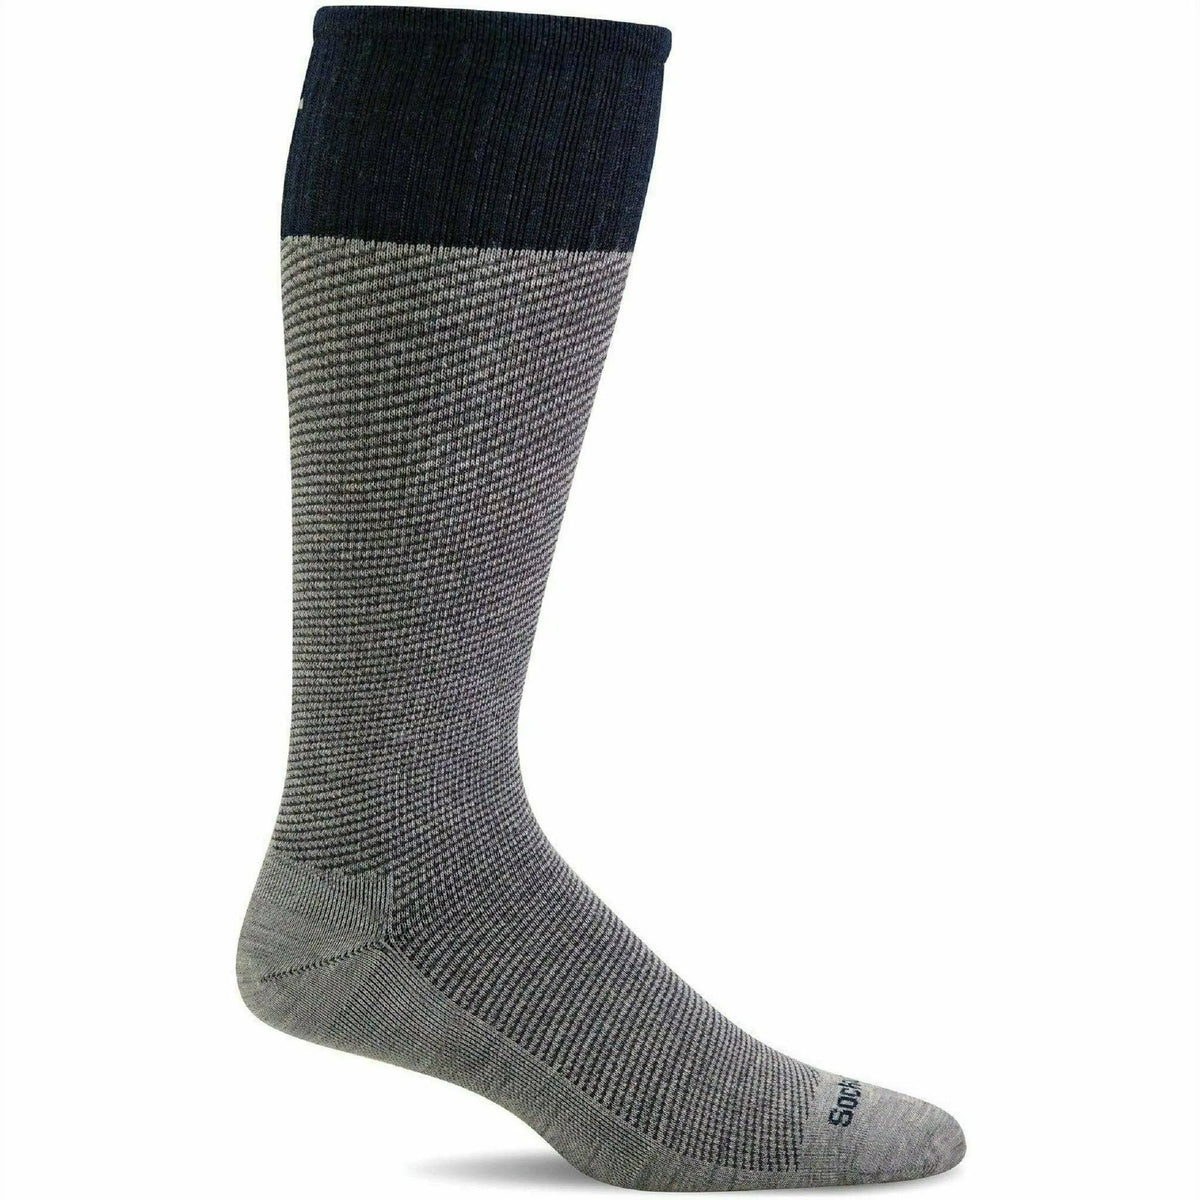 A single grey Sockwell Bart LT Grey 15-20 mmHg compression knee-high sock displayed against a white background.